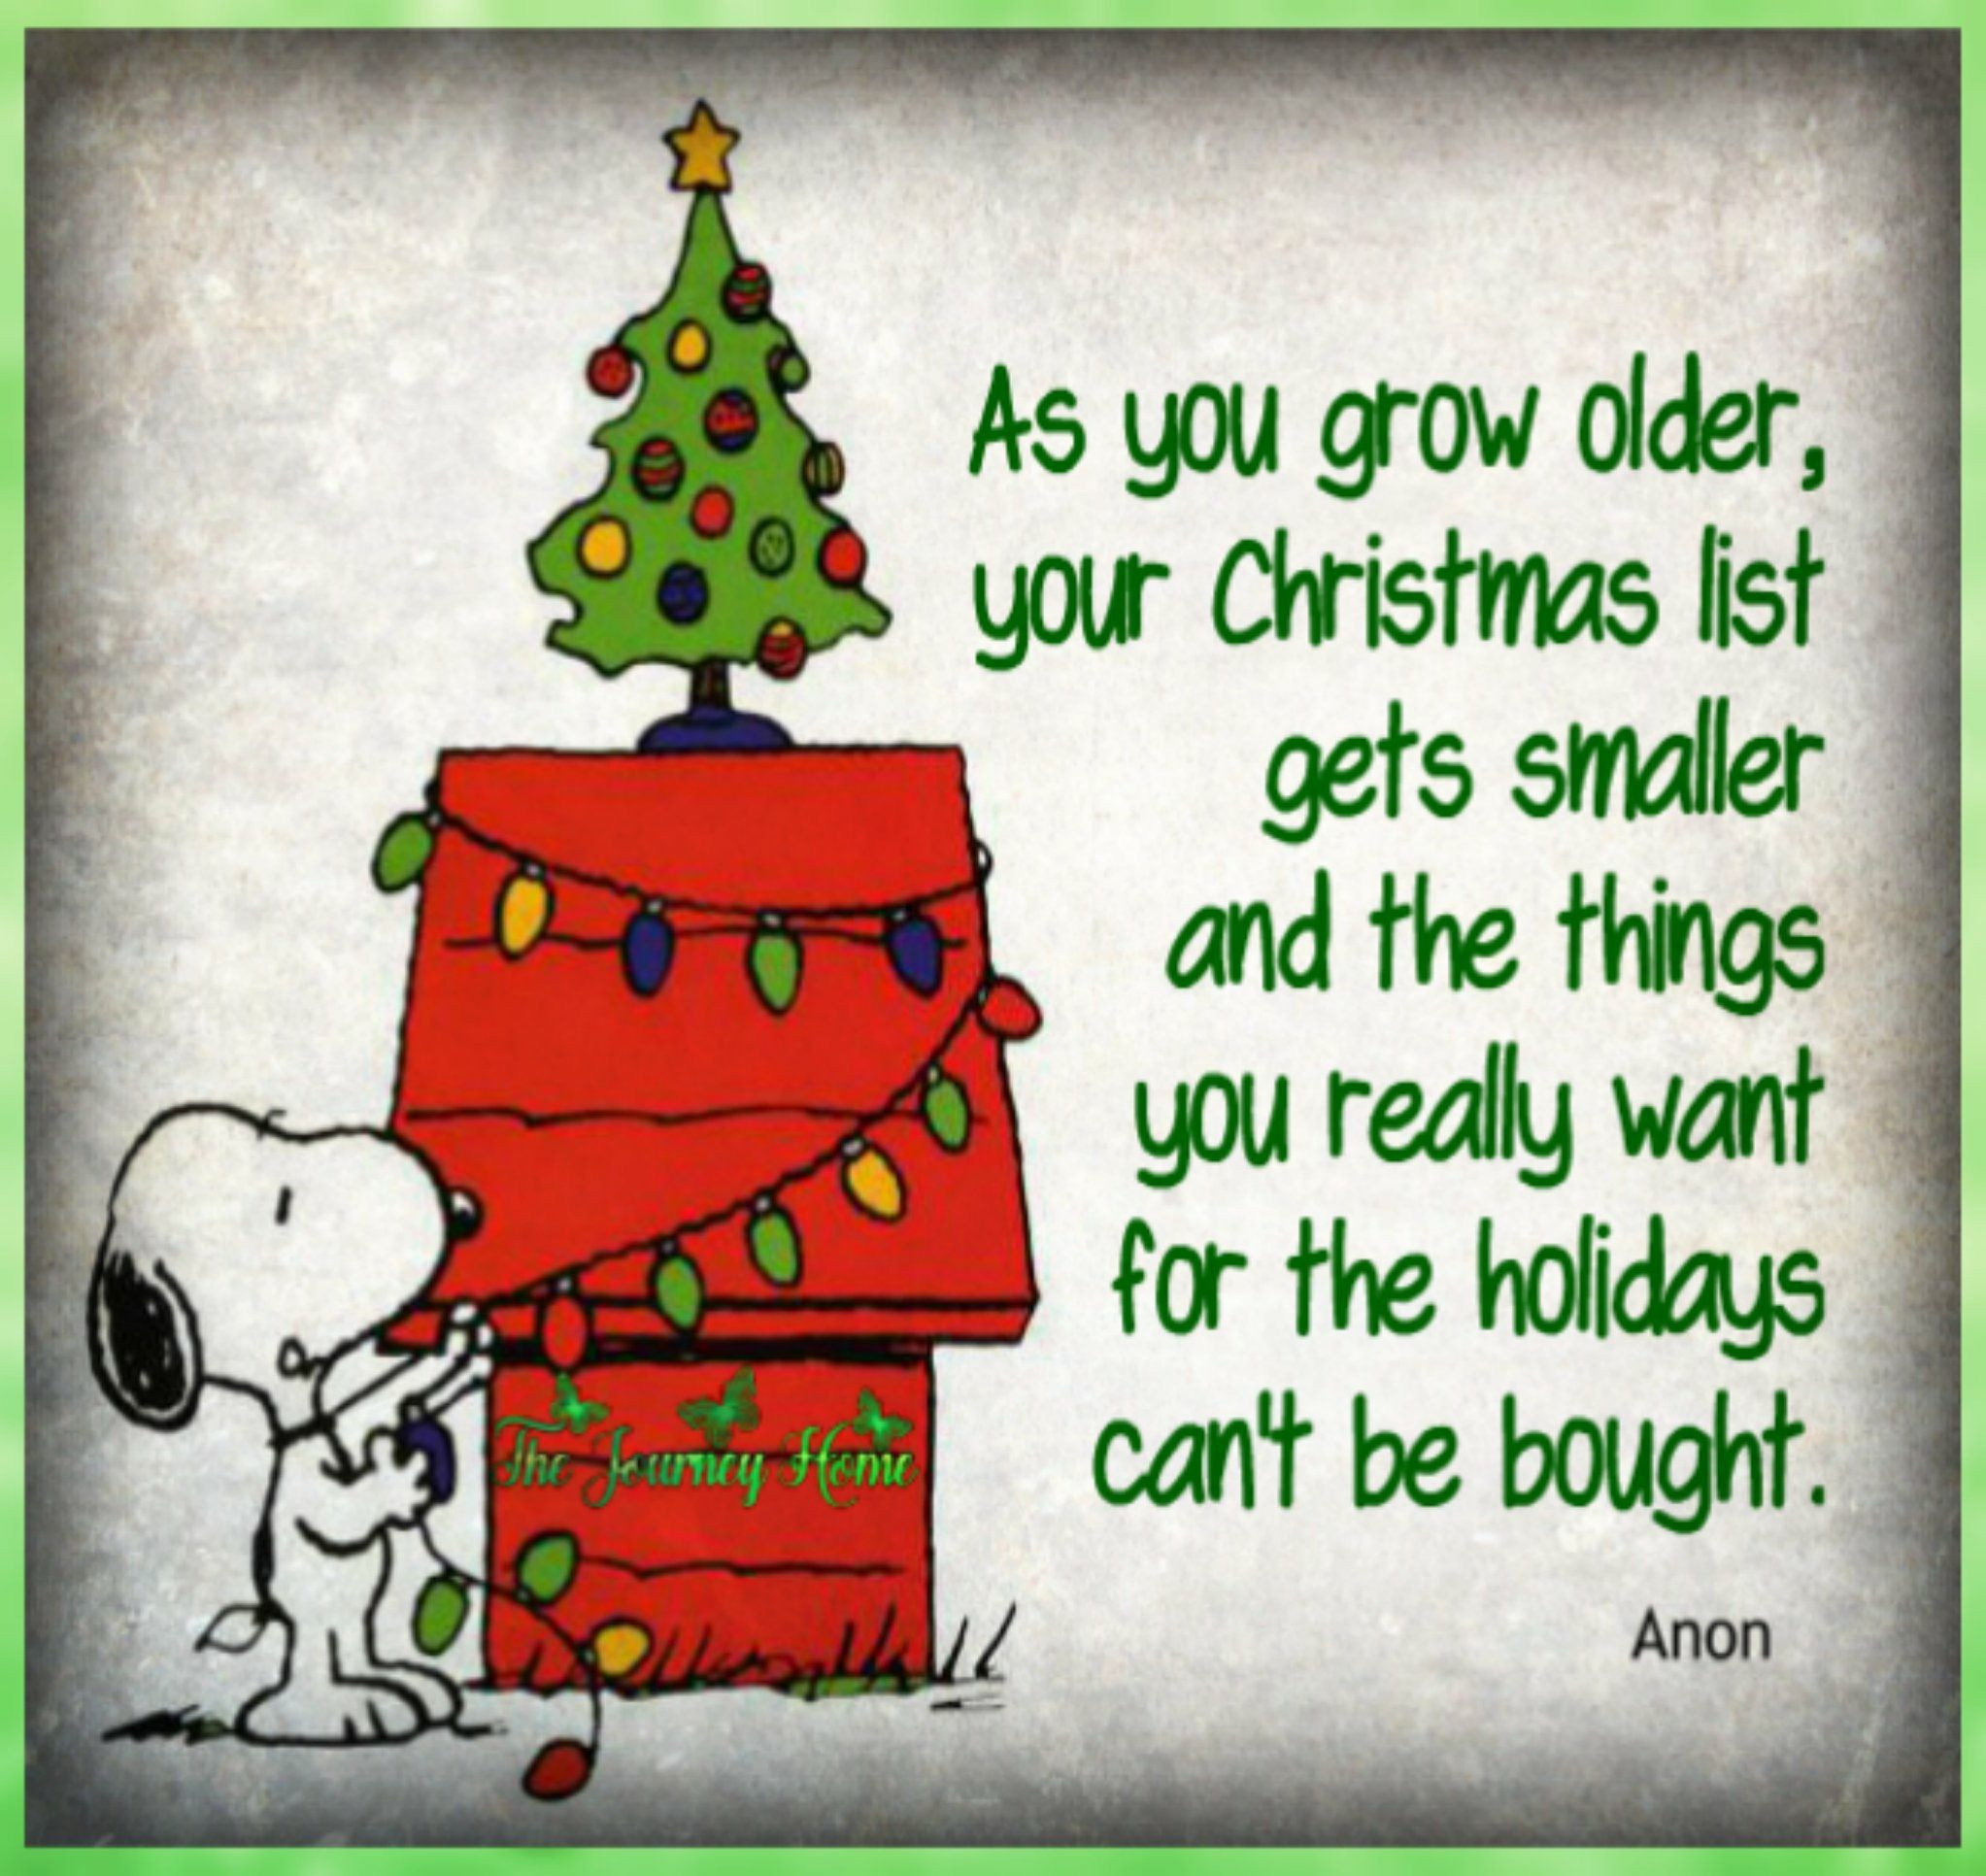 Peanuts Christmas Quotes
 Pin by Lisa Peterson on Peanuts Christmas